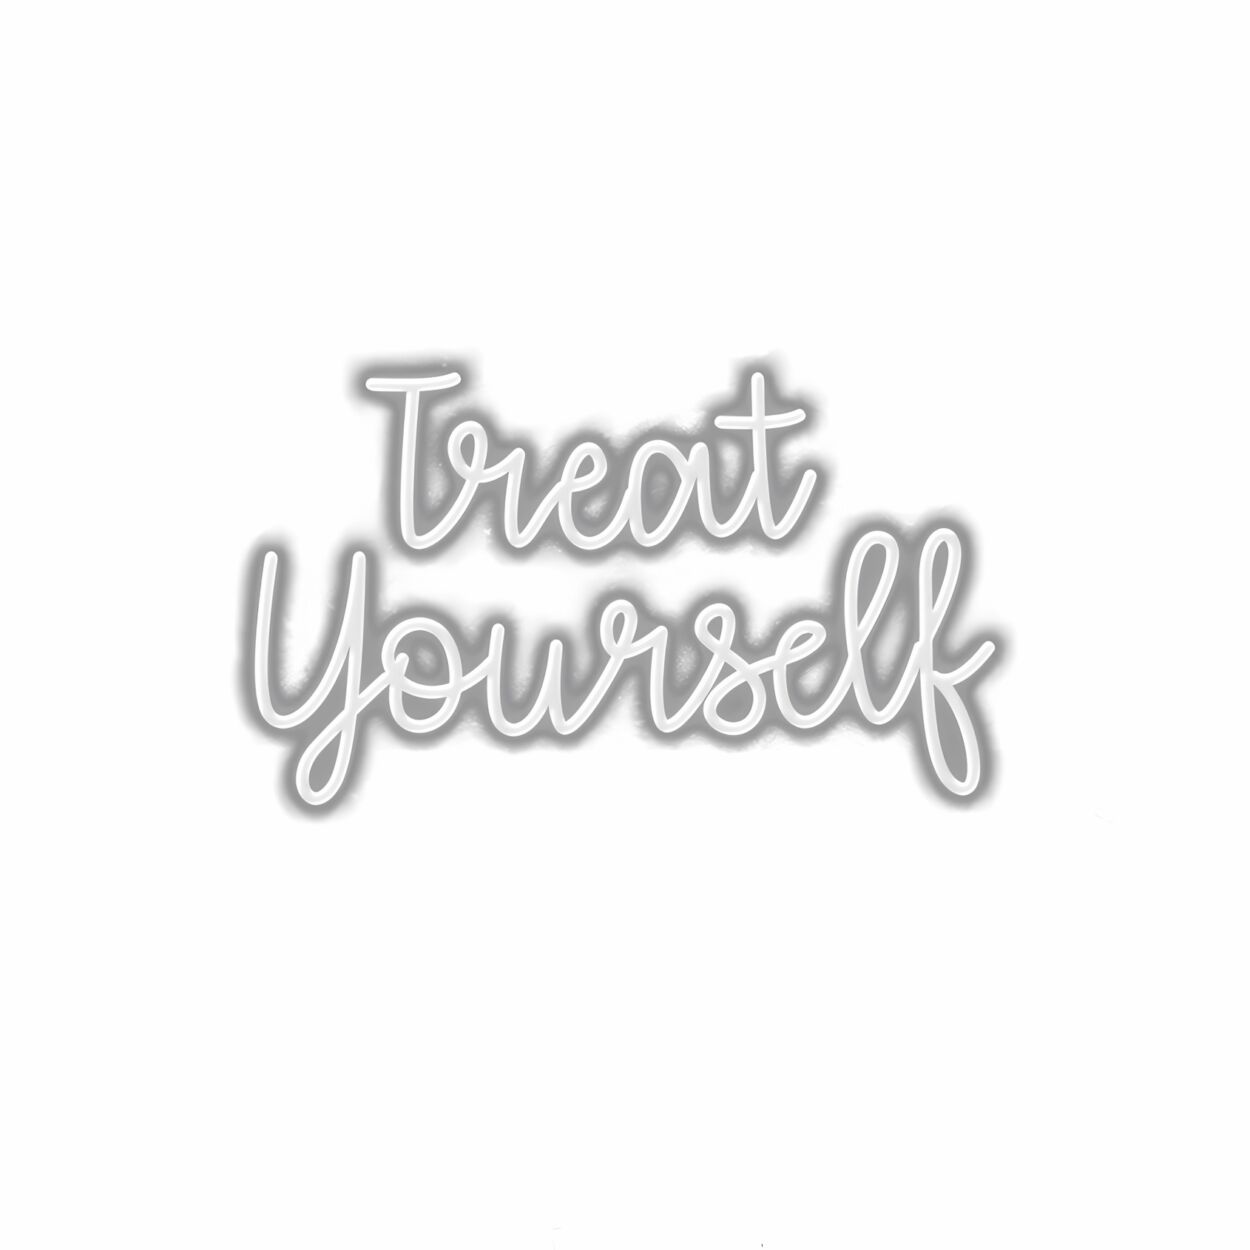 3D "Treat Yourself" motivational text-shadow effect.